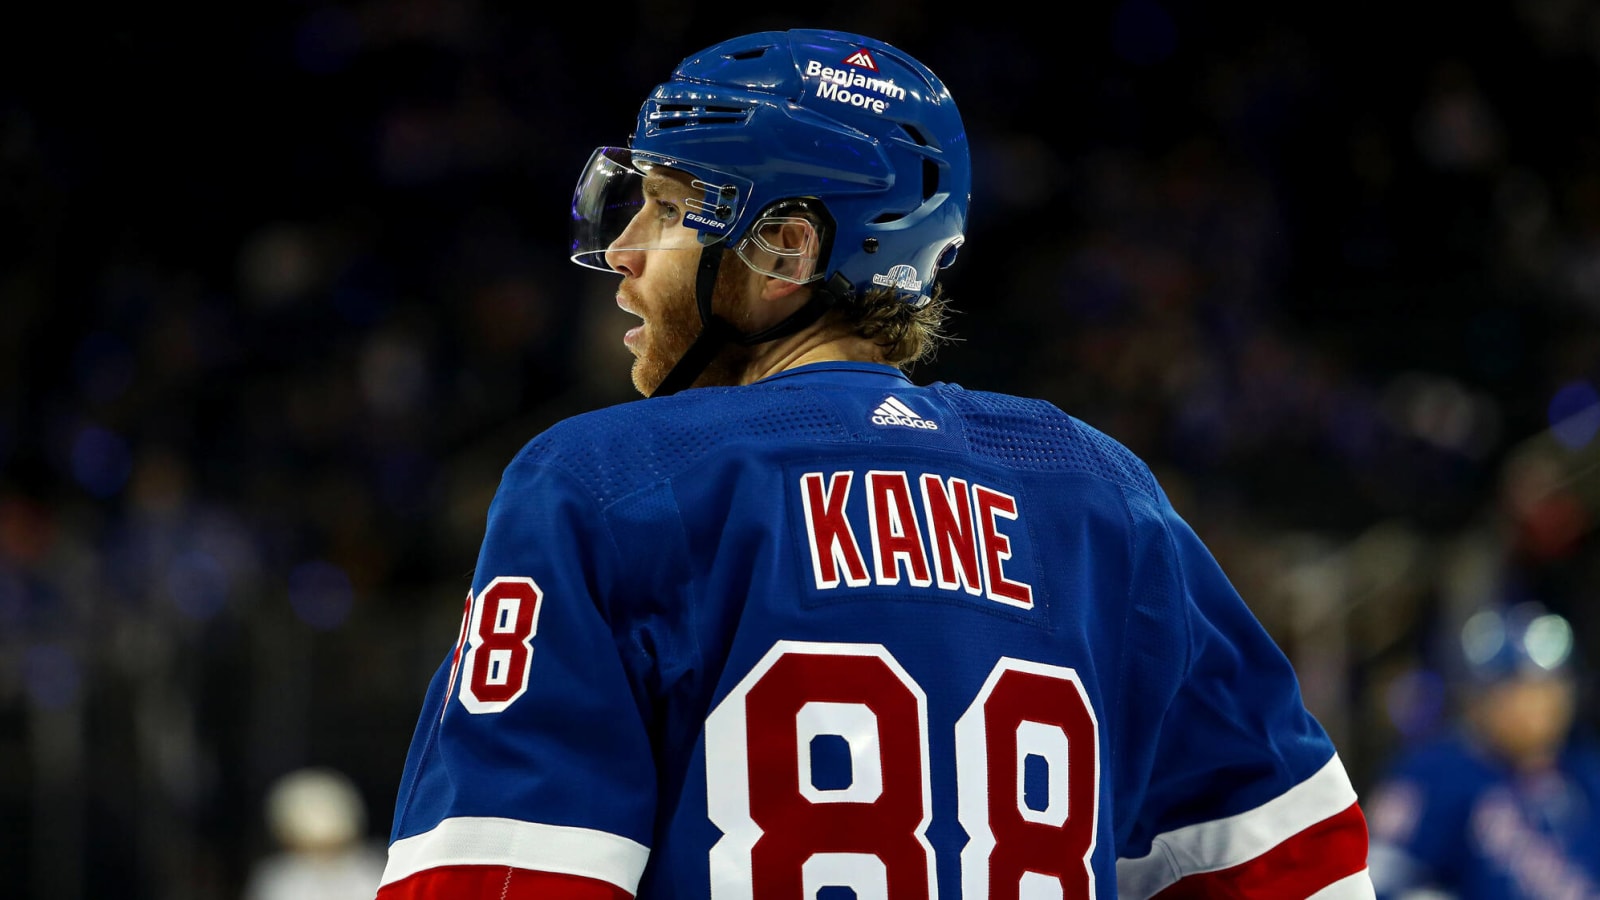 This NHL contender not interested in Patrick Kane